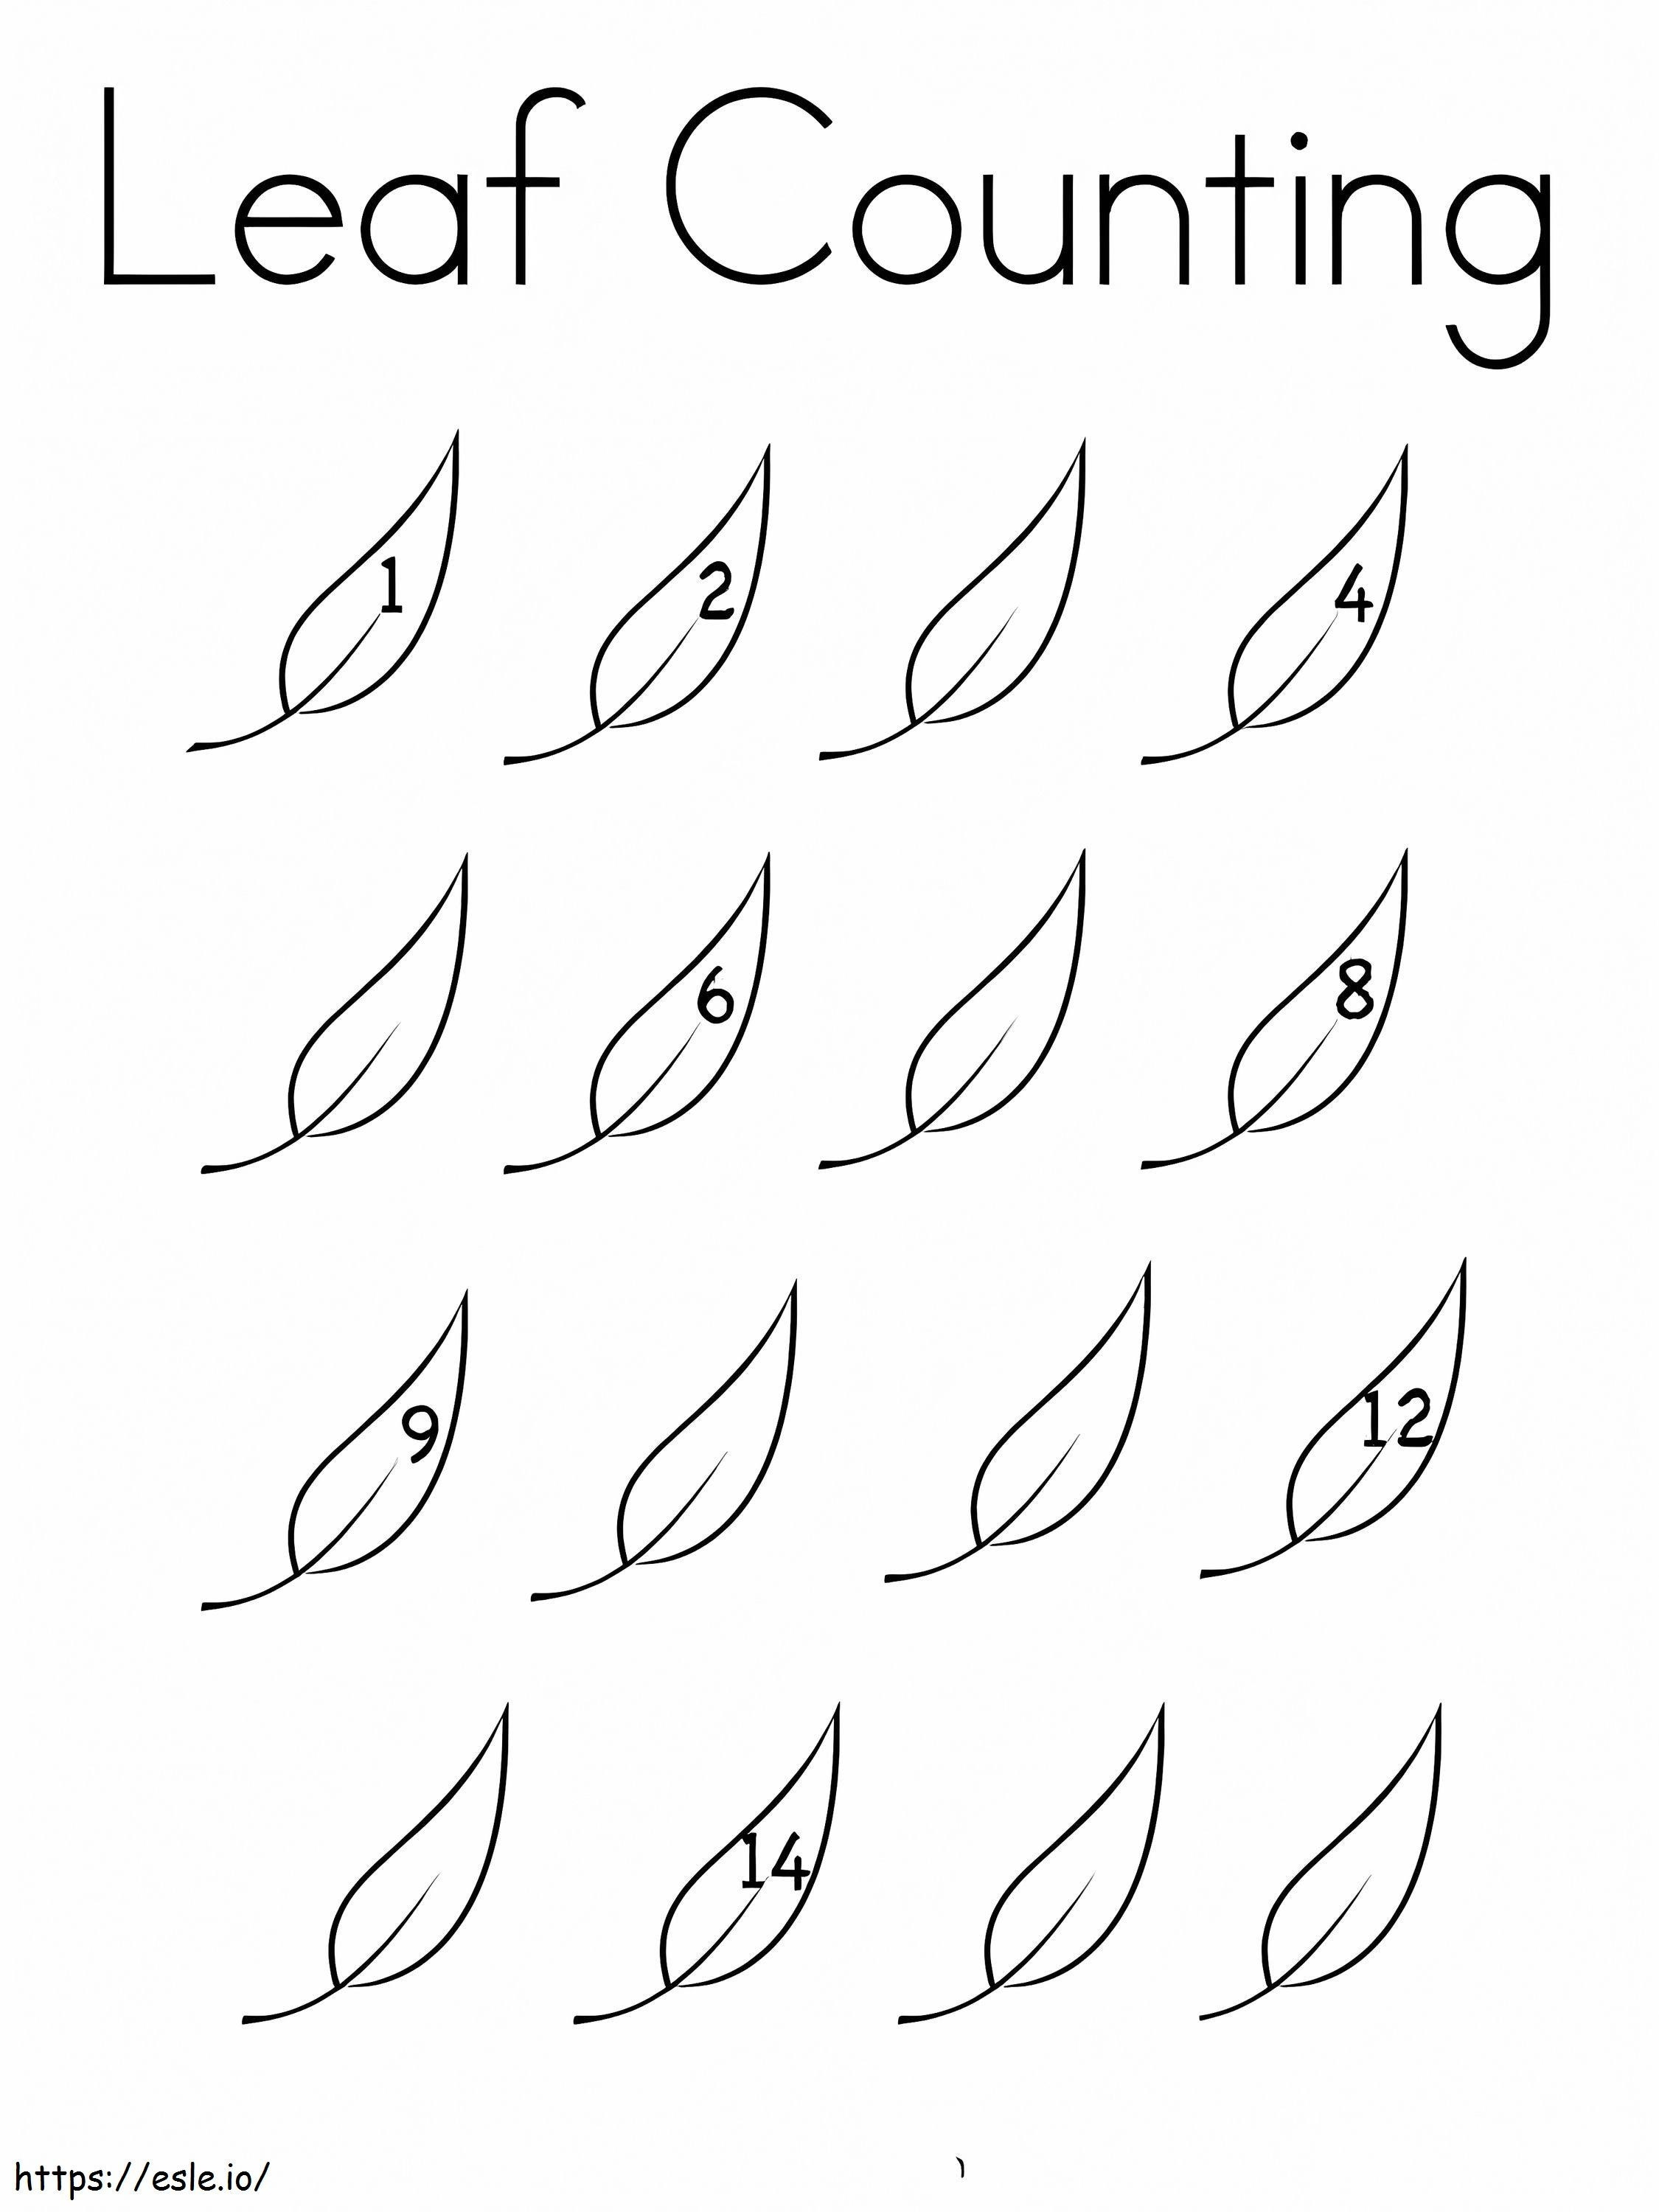 Leaf Counting coloring page